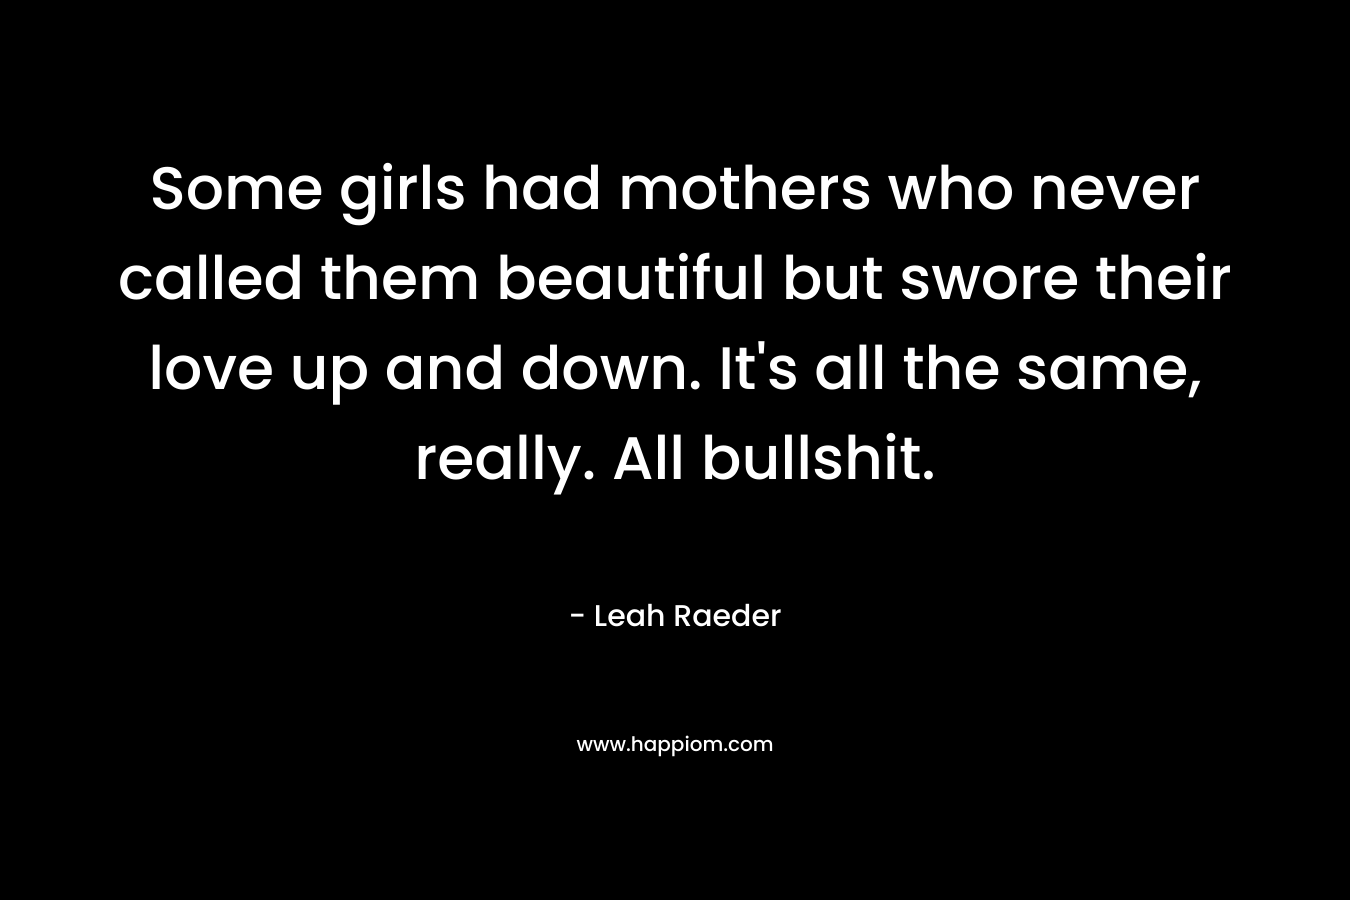 Some girls had mothers who never called them beautiful but swore their love up and down. It’s all the same, really. All bullshit. – Leah Raeder